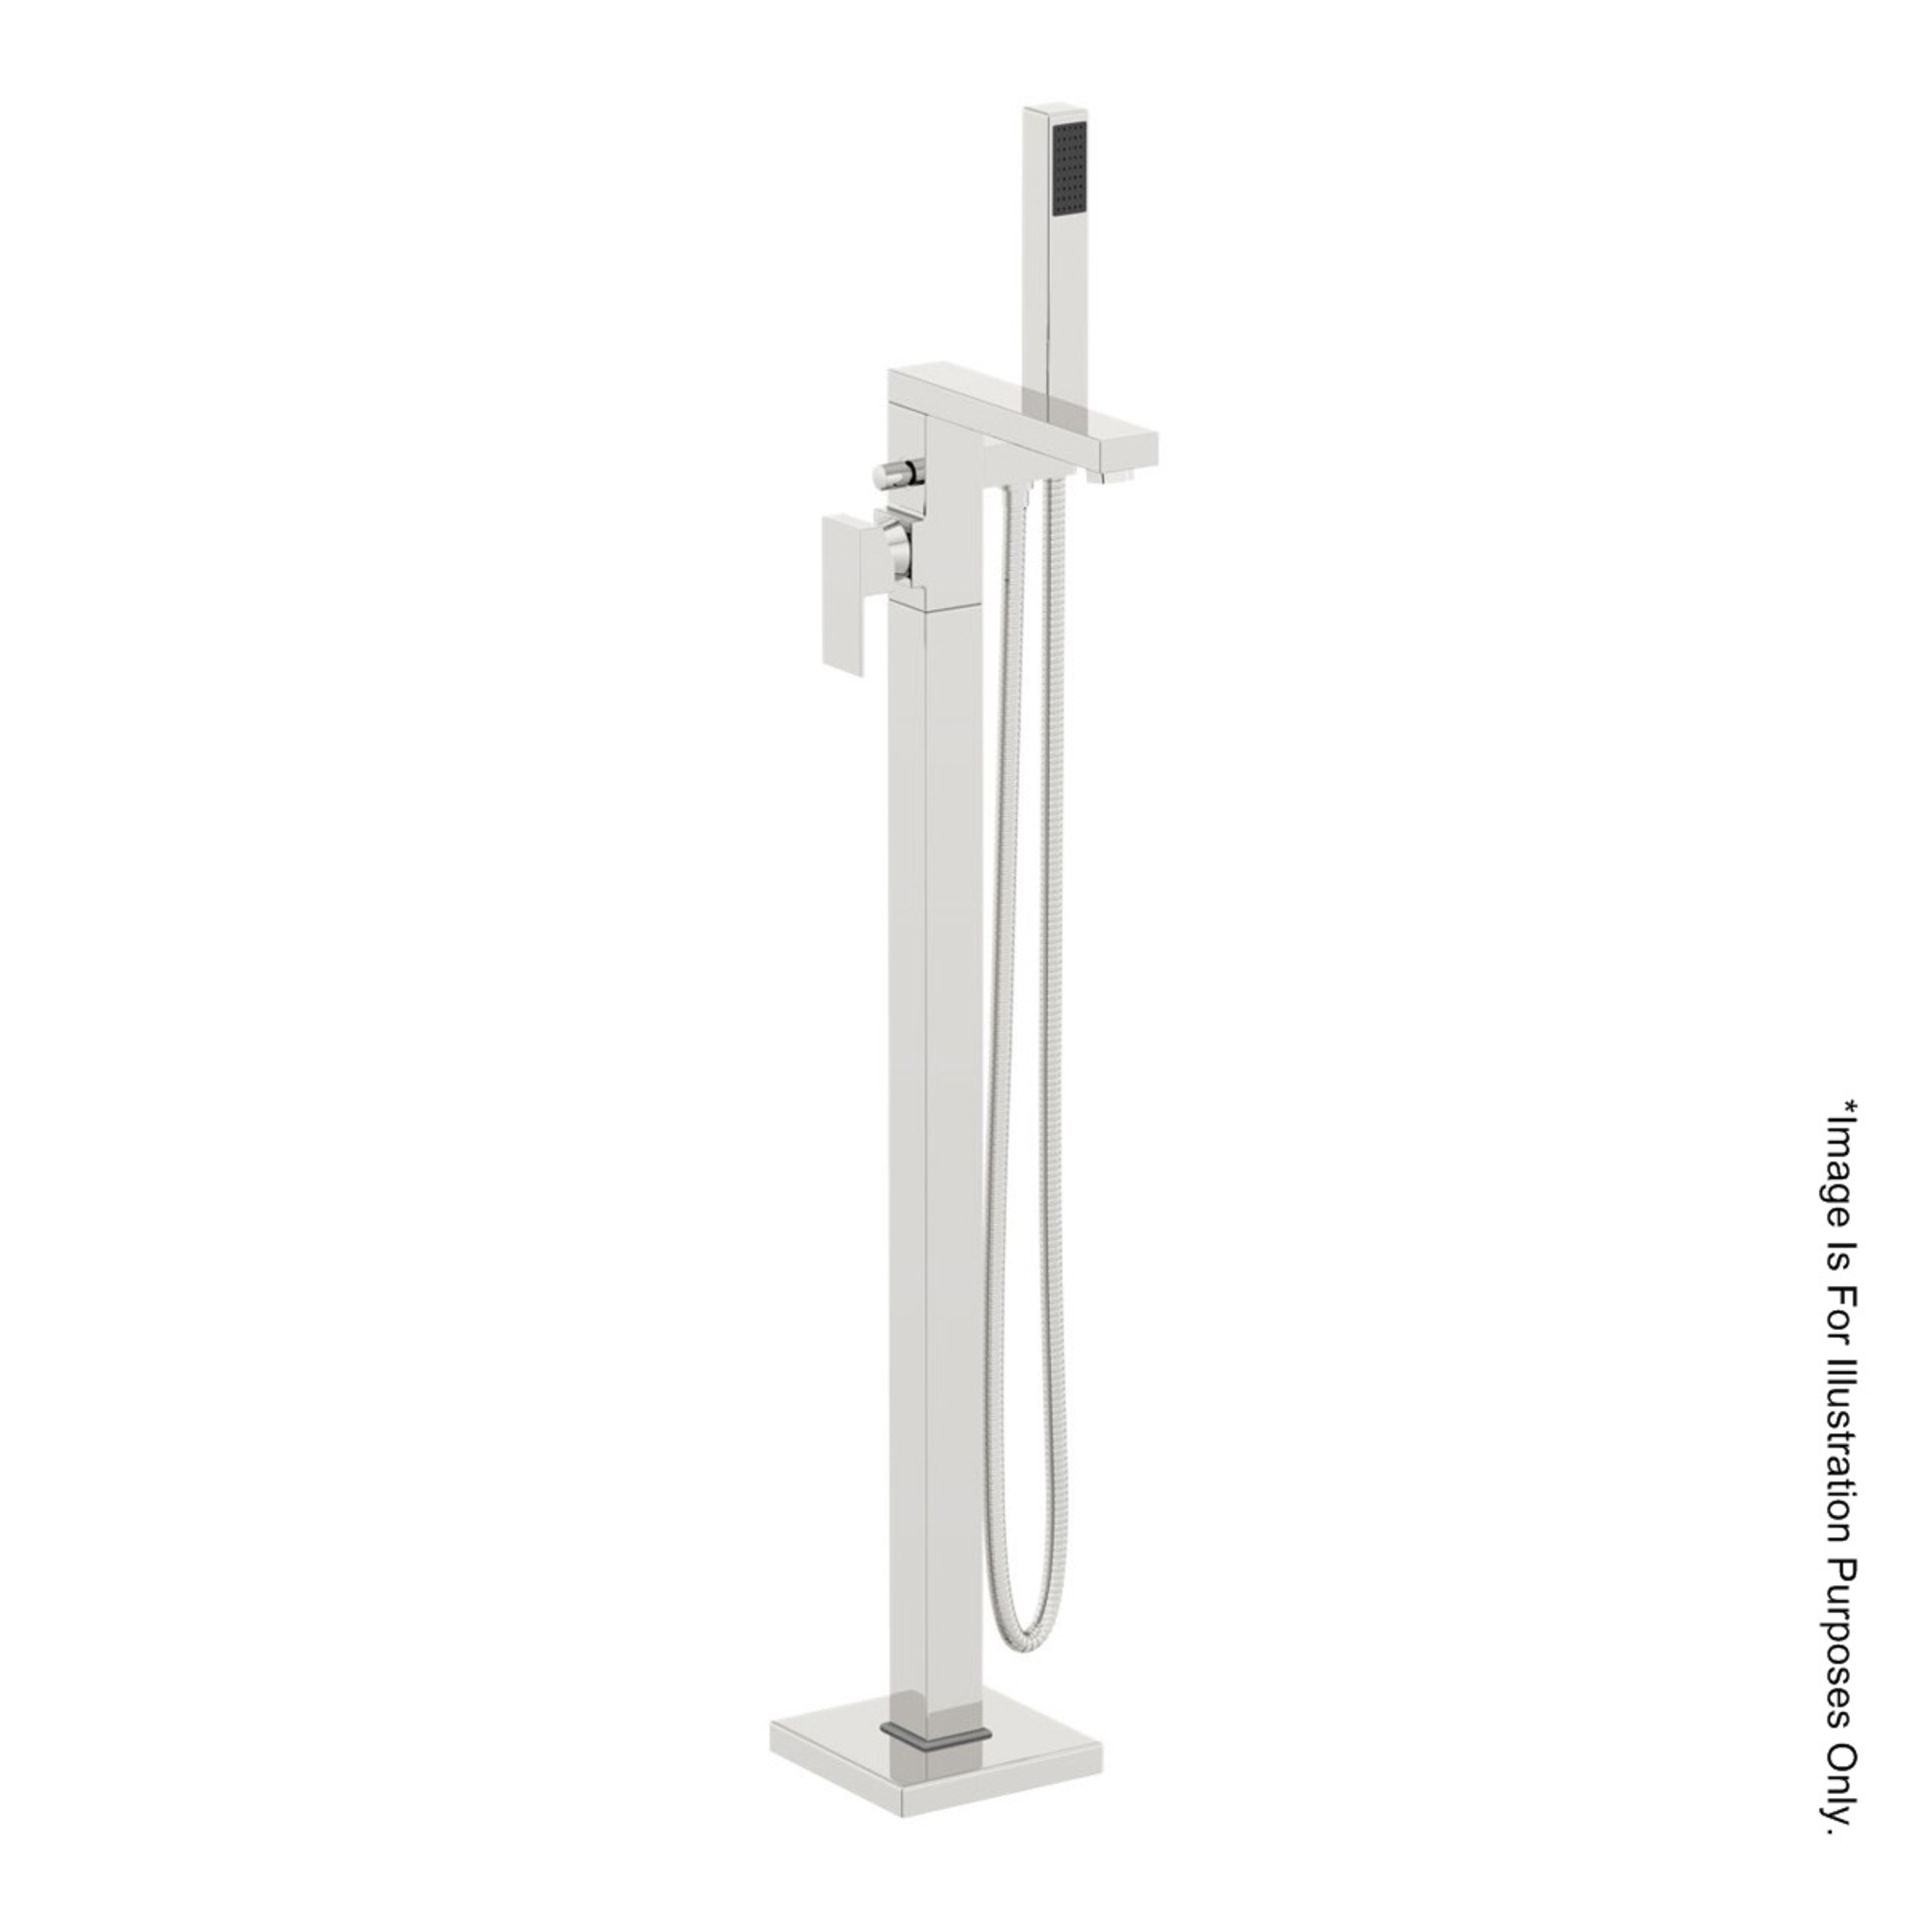 1 x Richmond Freestanding Bath Filler Tap In Chrome - Ref: MBI002 - CL190 - Unused Boxed Stock - - Image 3 of 8